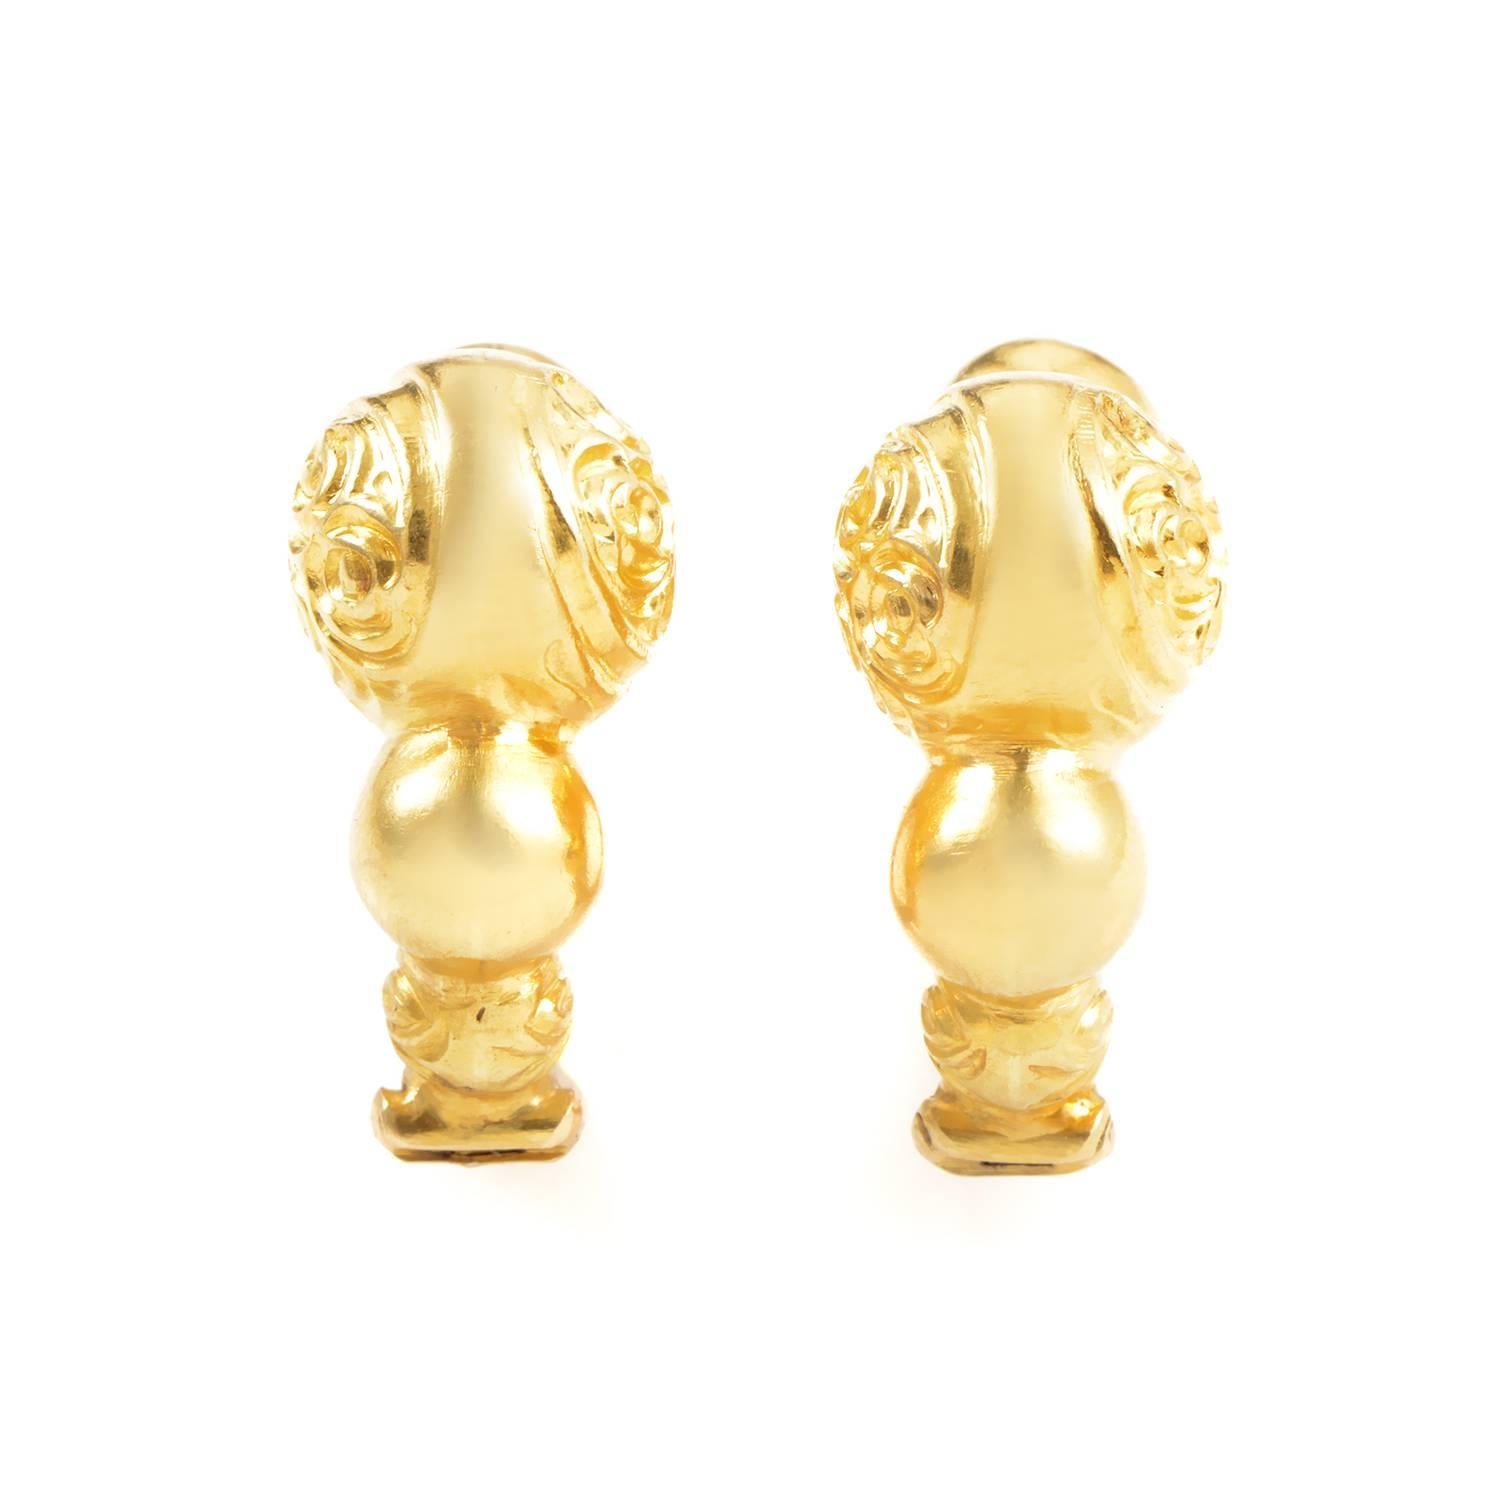 Exceptional prestige in its highly elegant and tasteful form, these splendid earrings from Ilias Lalaounis catch your eye with that special 22K yellow gold radiance and reveal their full beauty upon a closer look at their intricate ornamentation.
